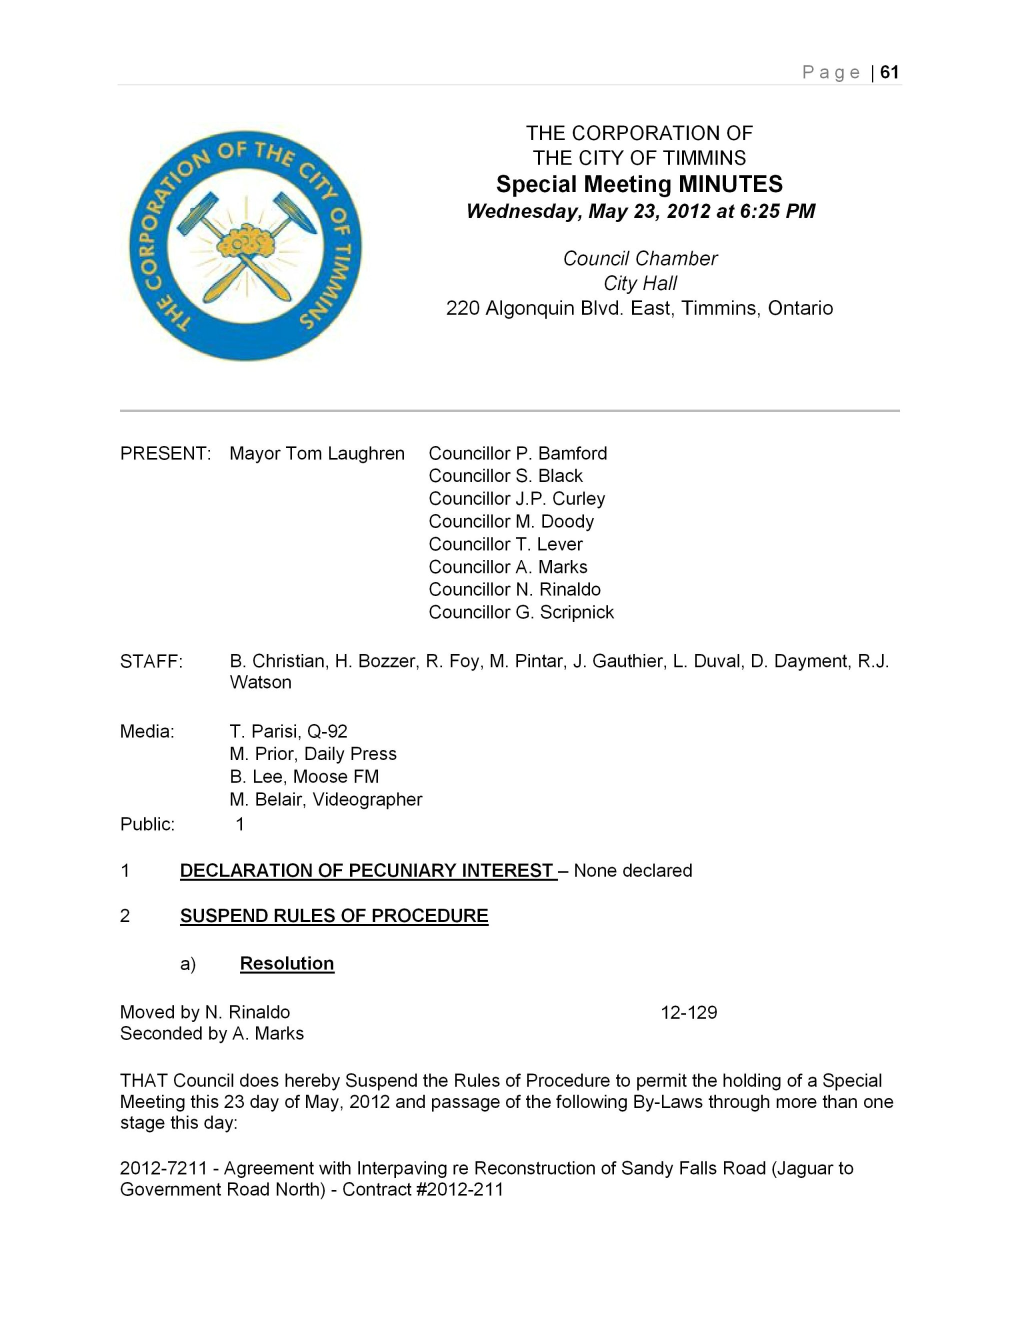 Special Meeting MINUTES Wednesday May 23 2012 at 625 PM